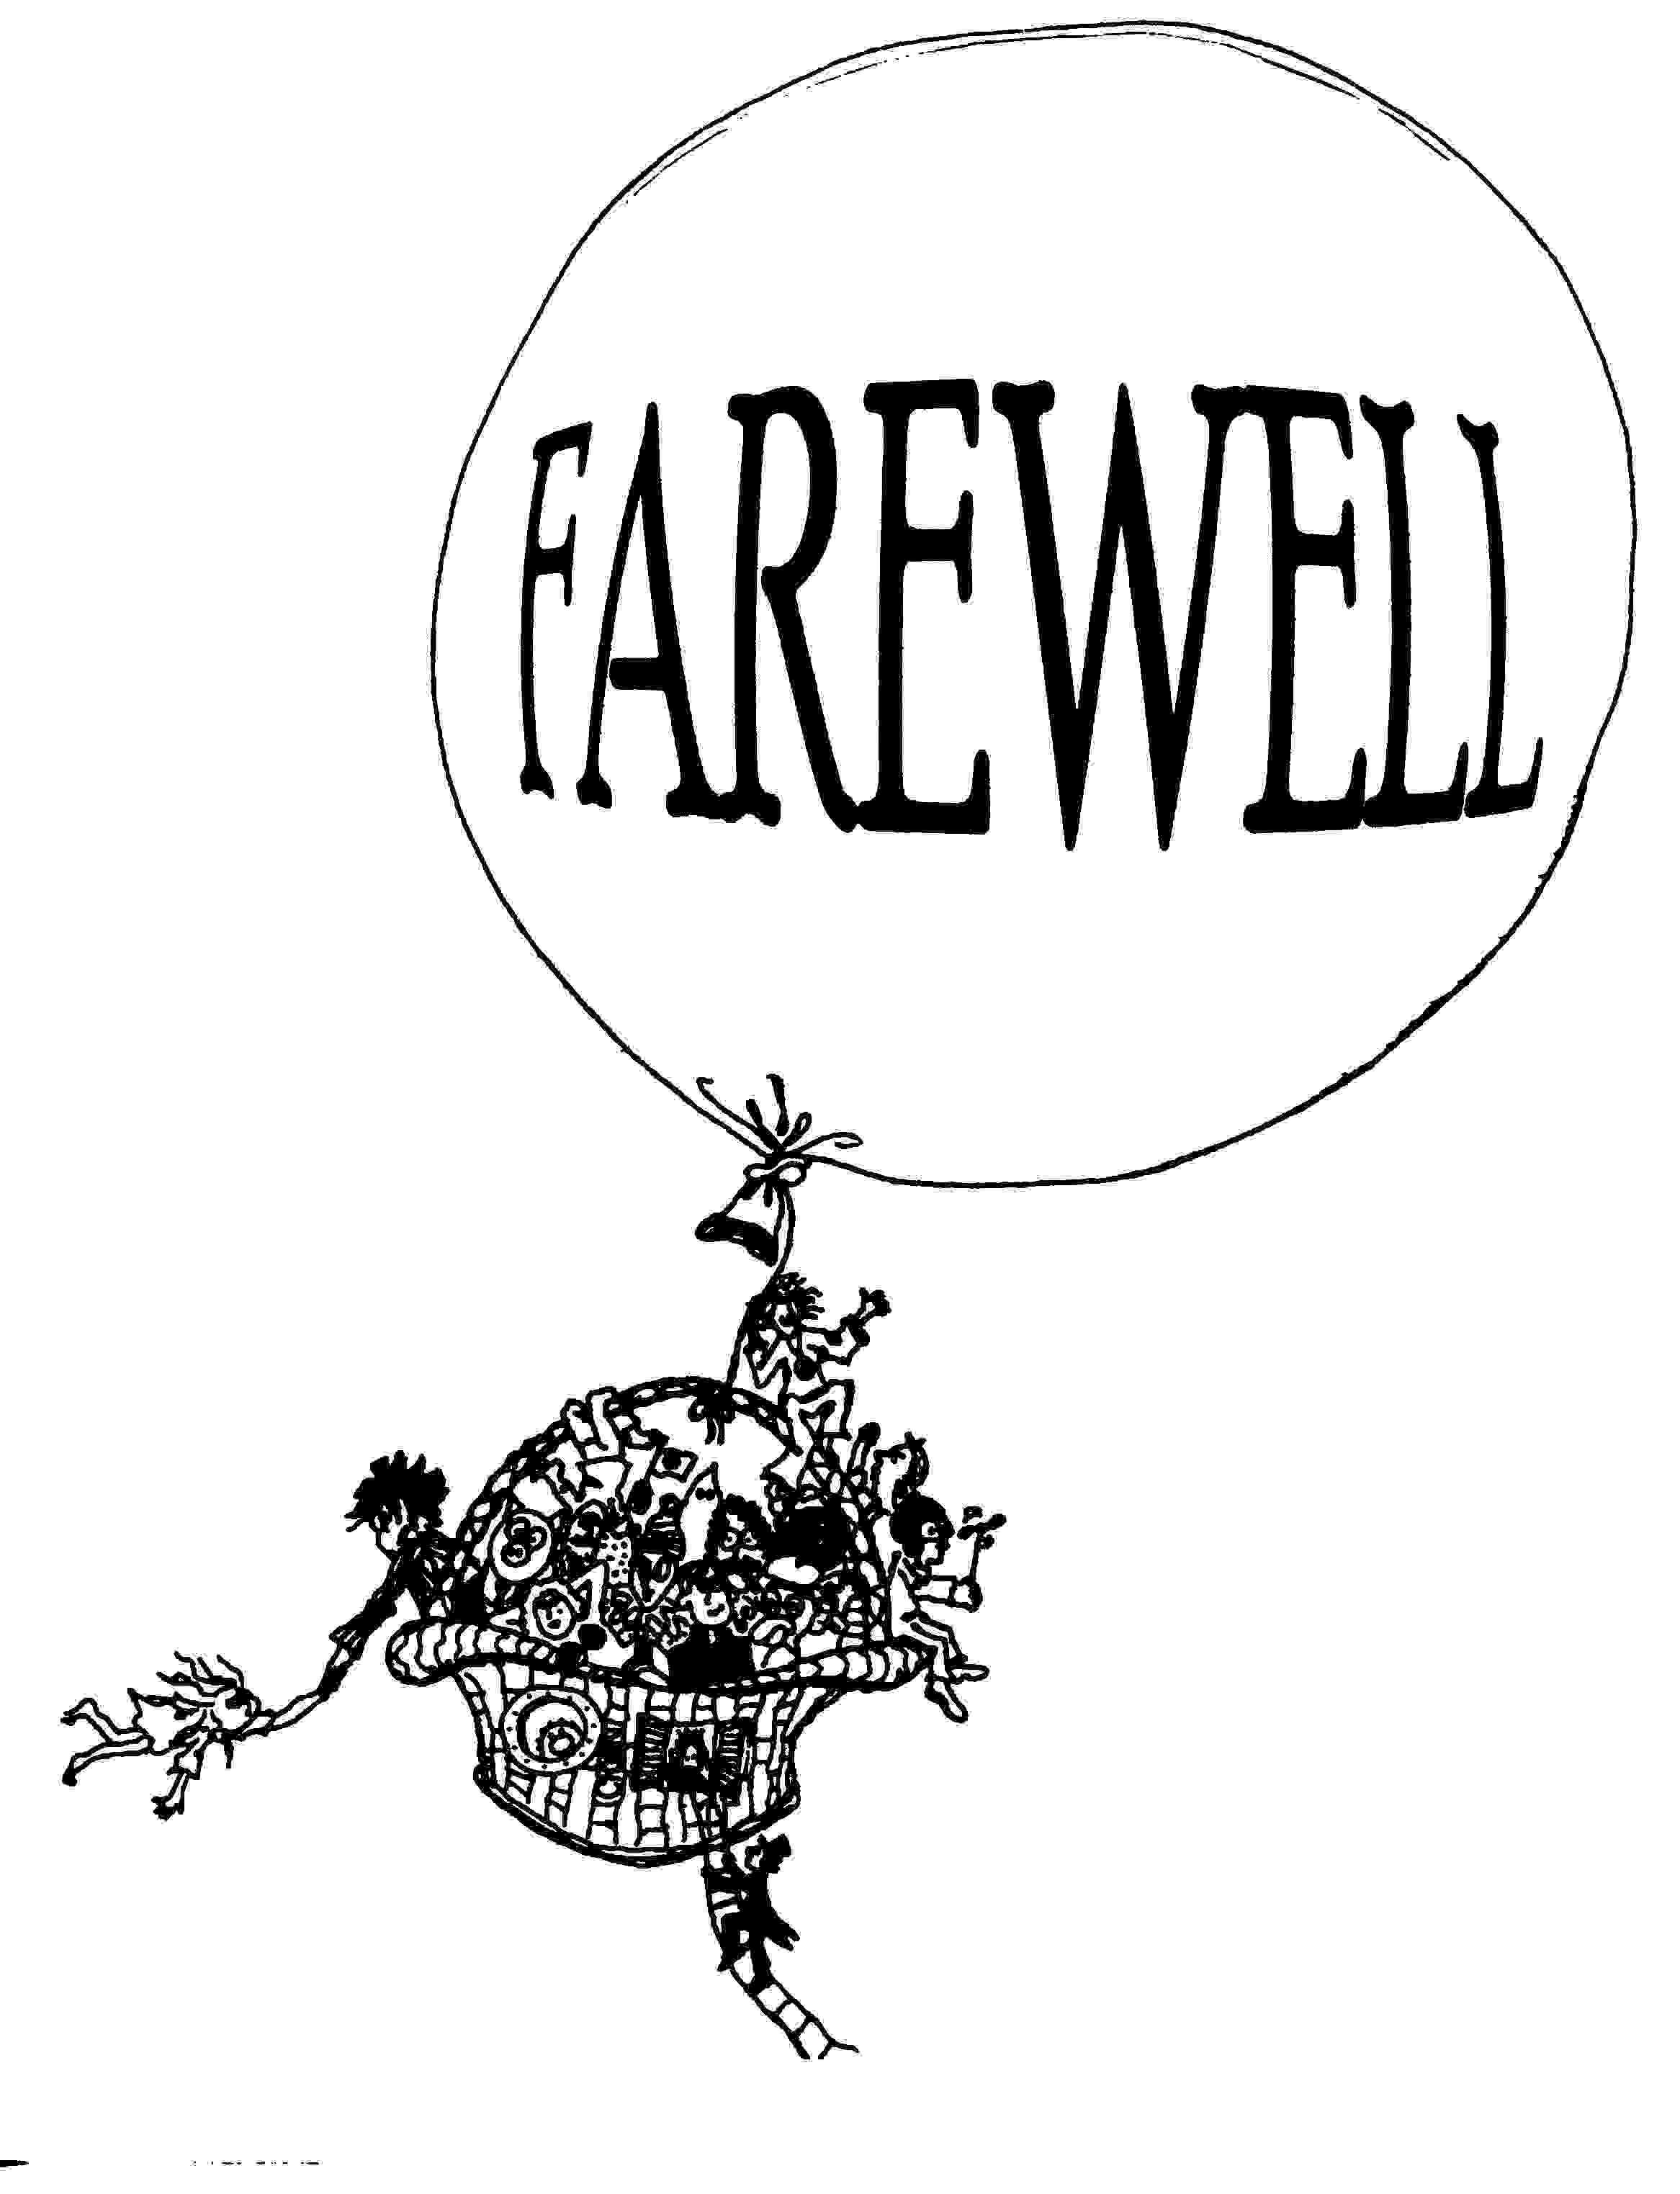 Farewell clipart images